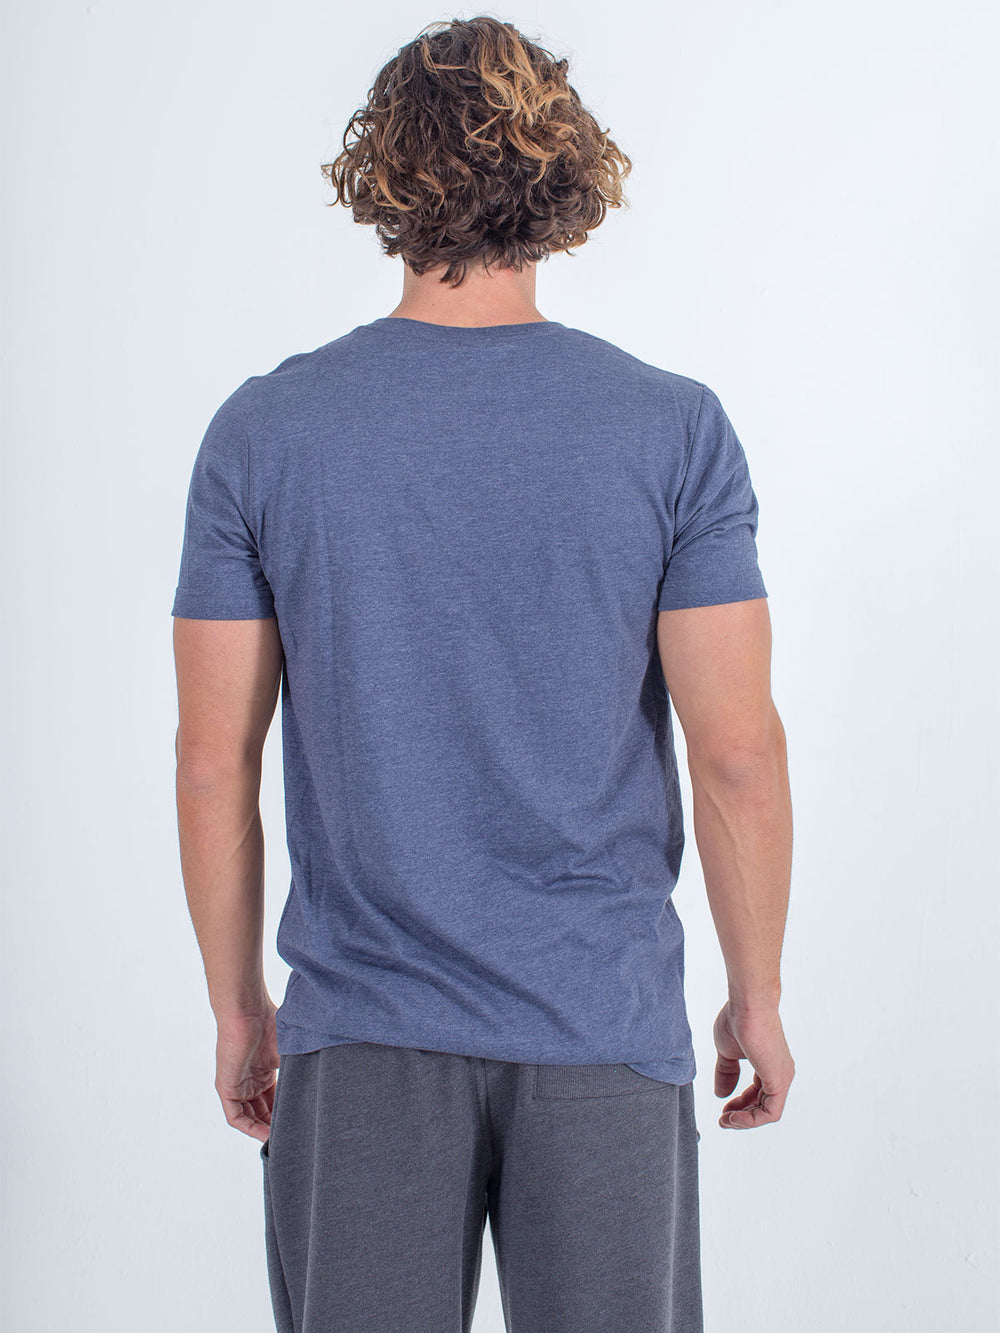 Sexy brand X-Chest Logo Tee T-Shirt in navy blue back view